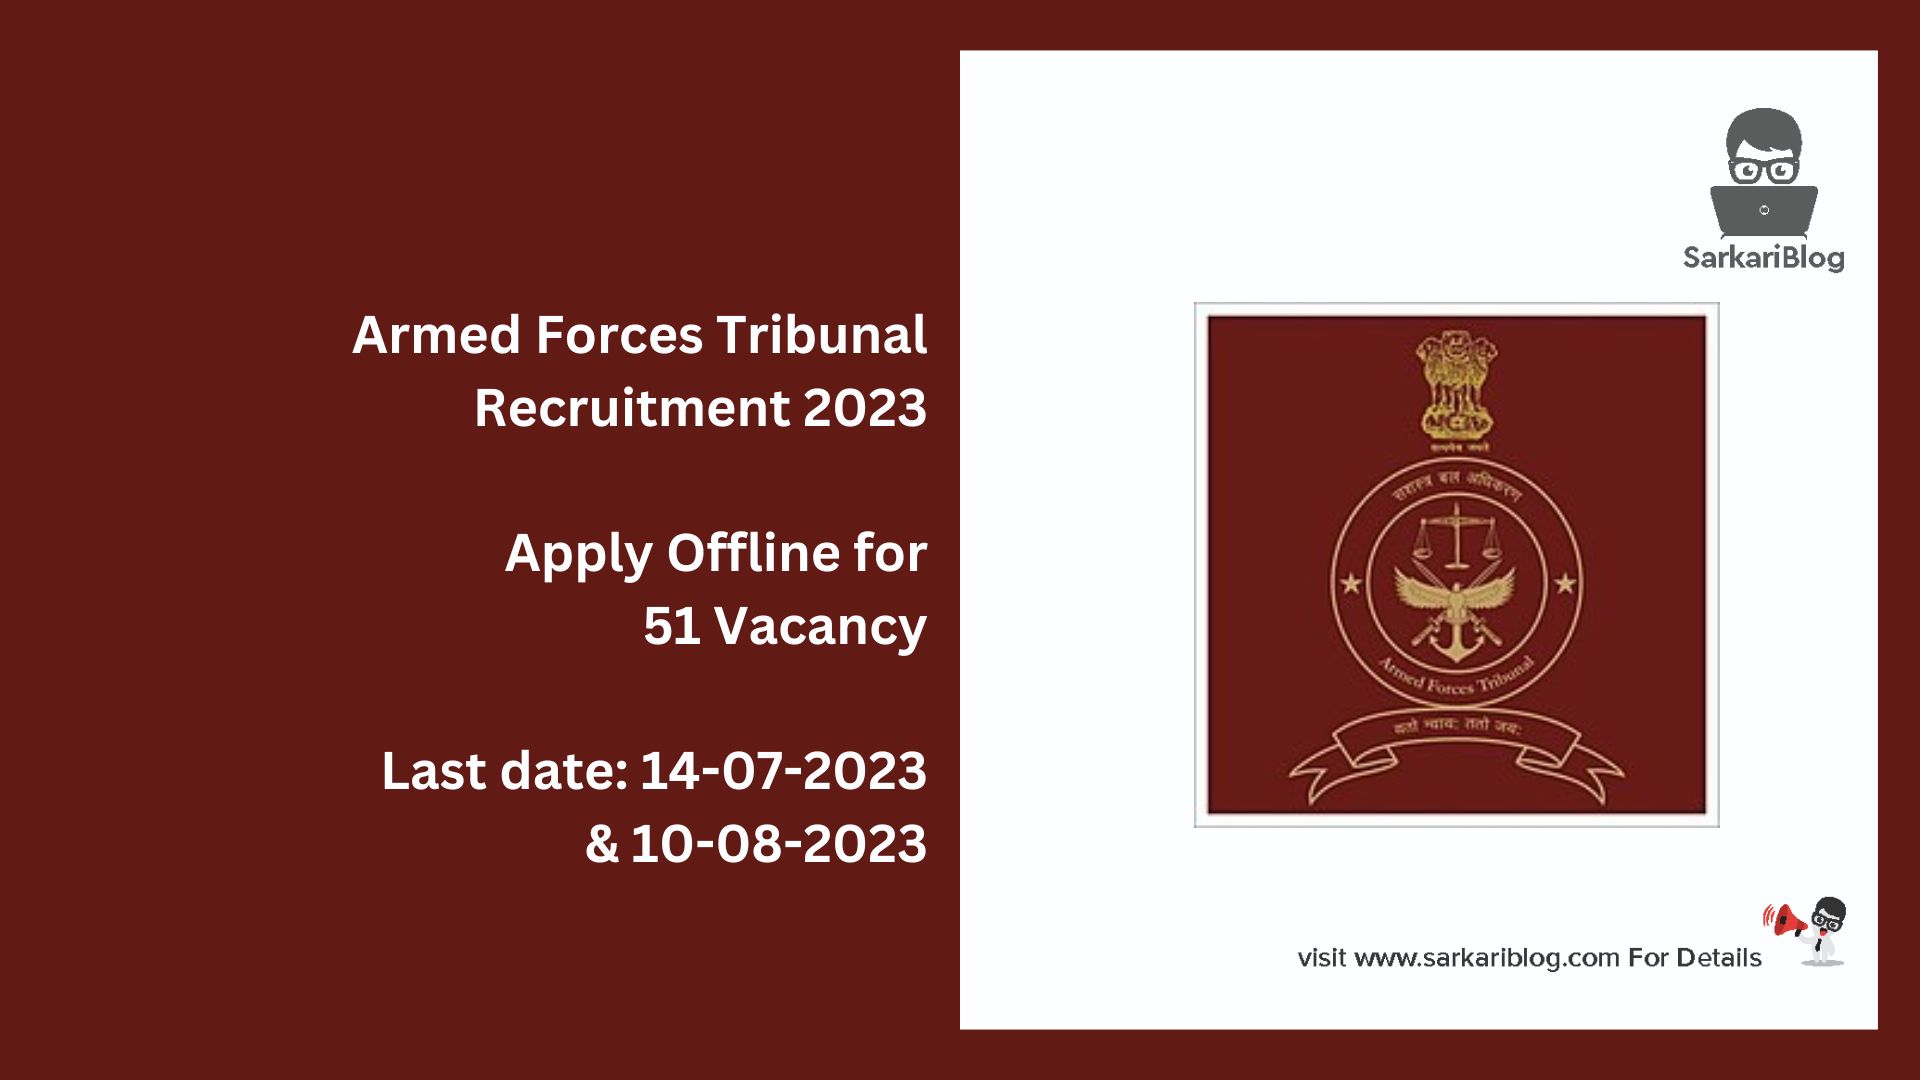 Armed Forces Tribunal Recruitment 2023